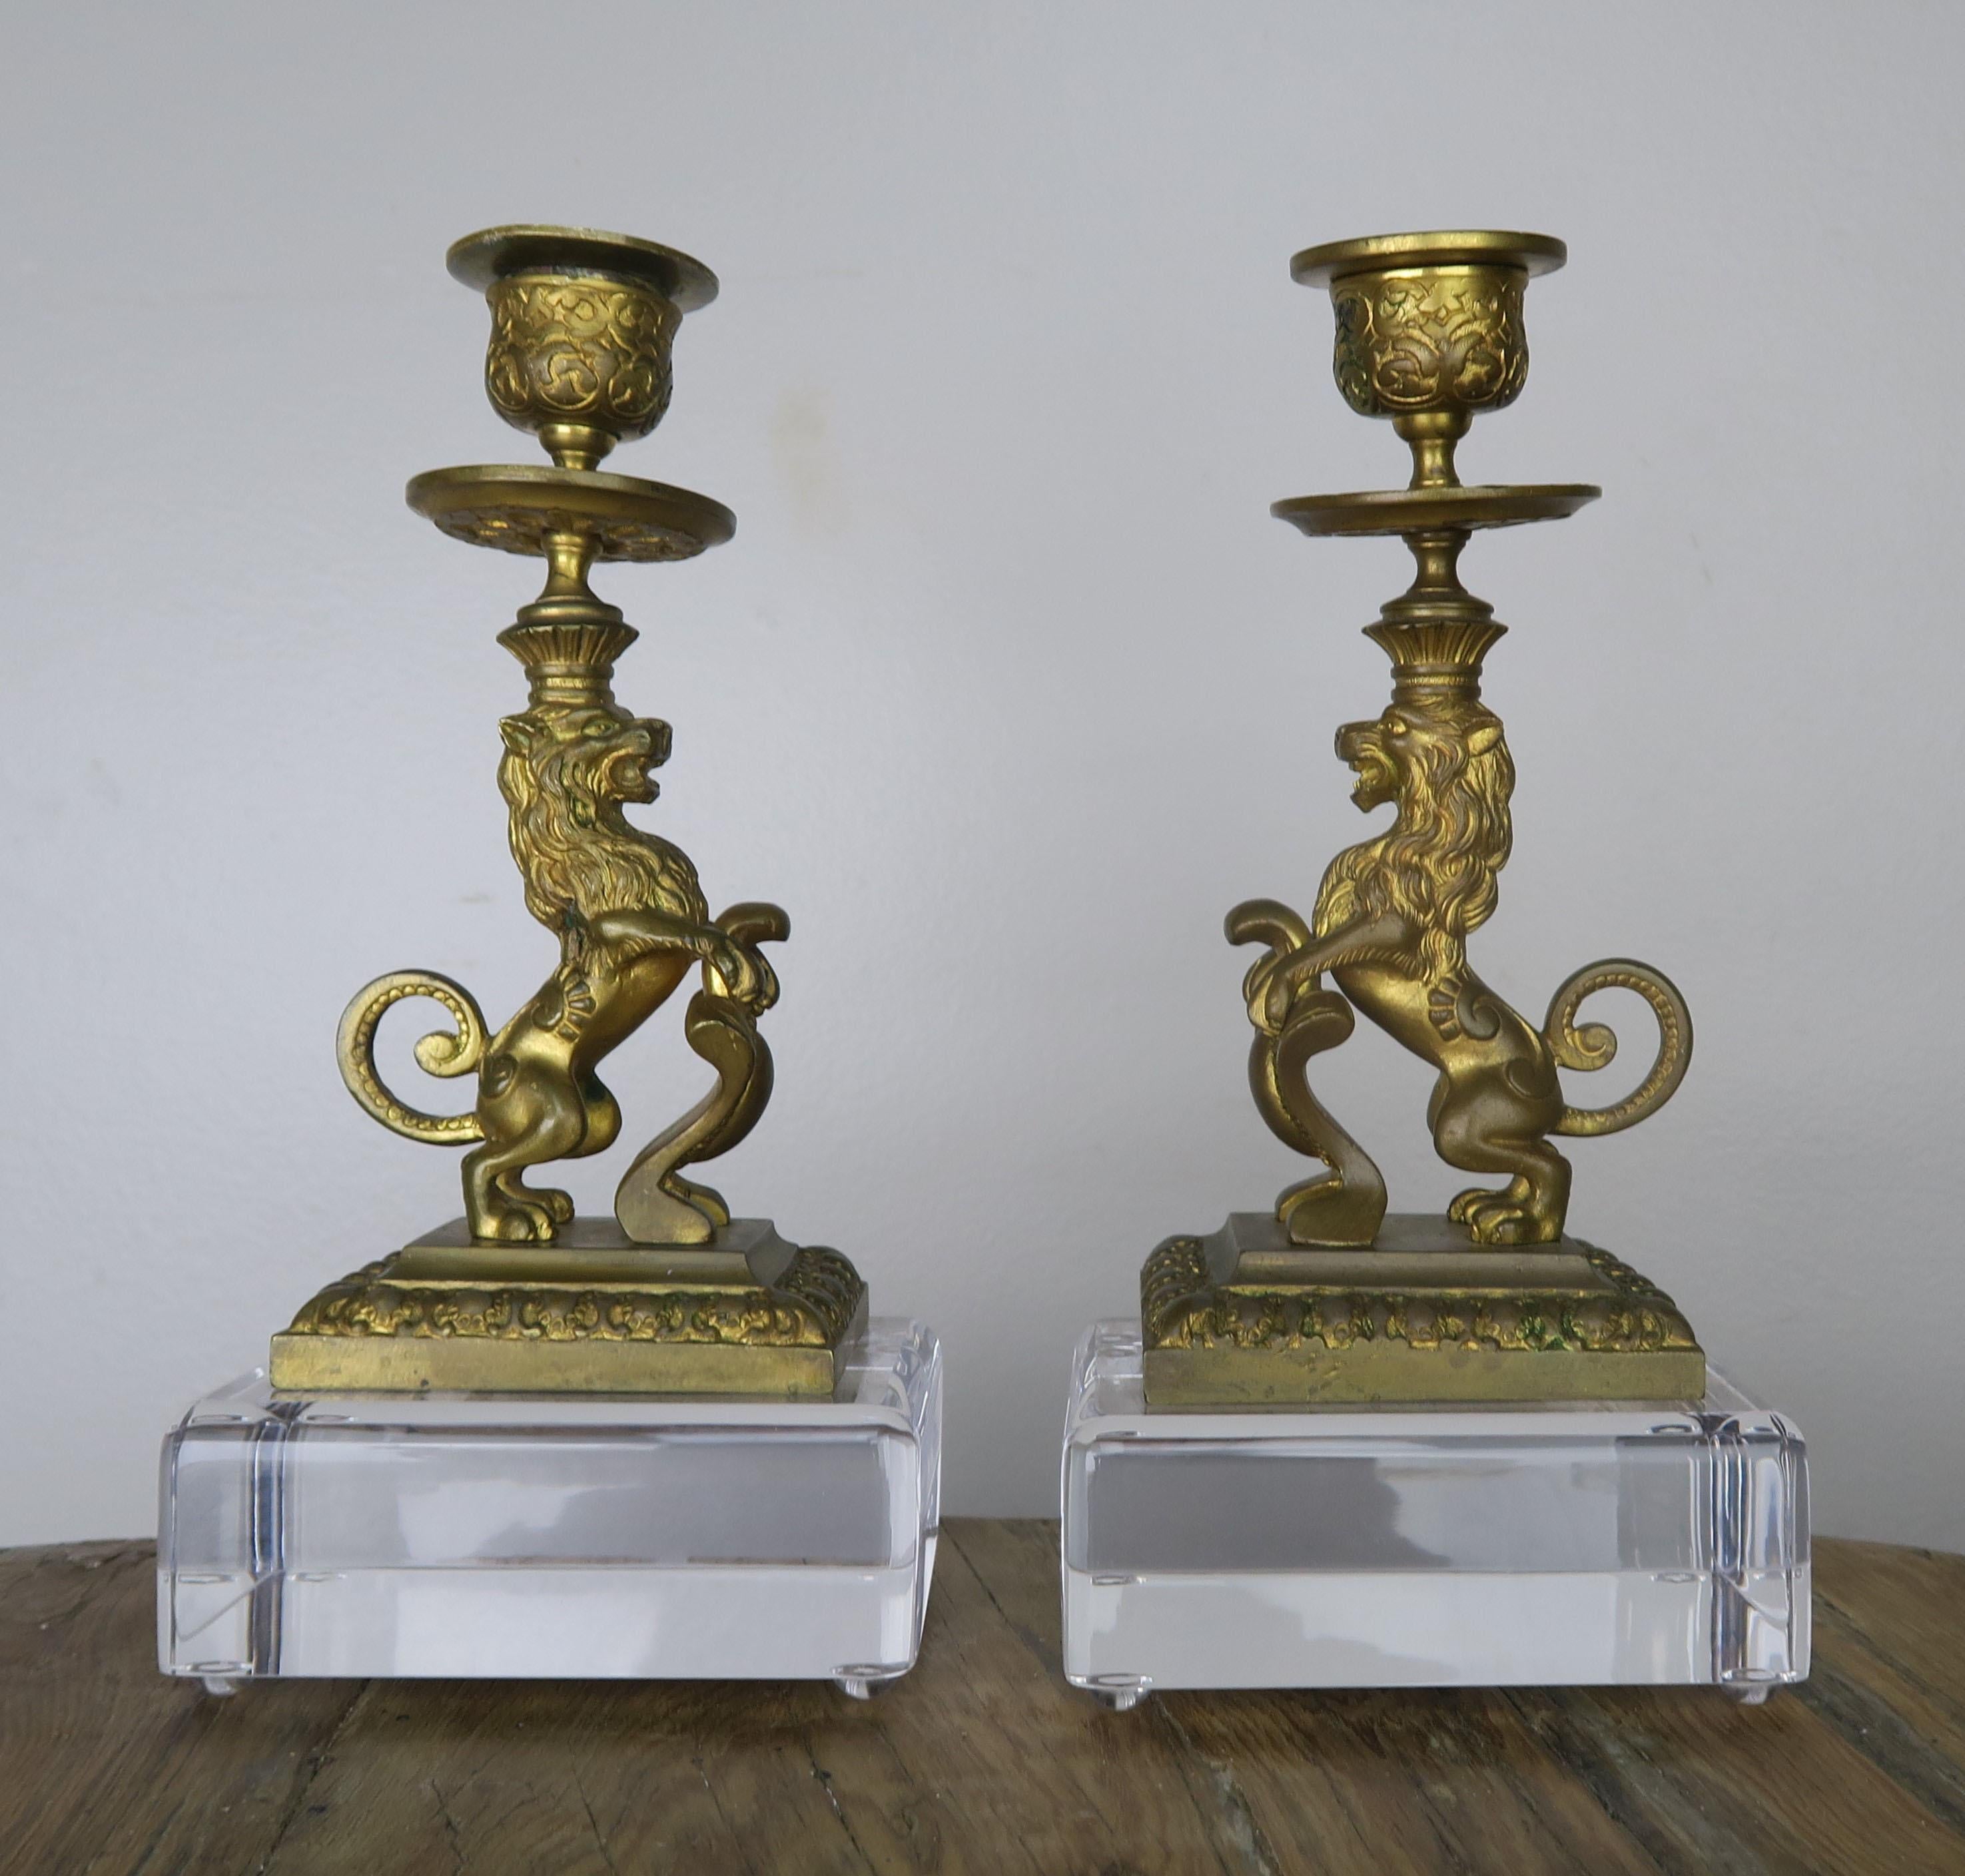 Pair of 19th century bronze lion candleholders mounted on 1.5